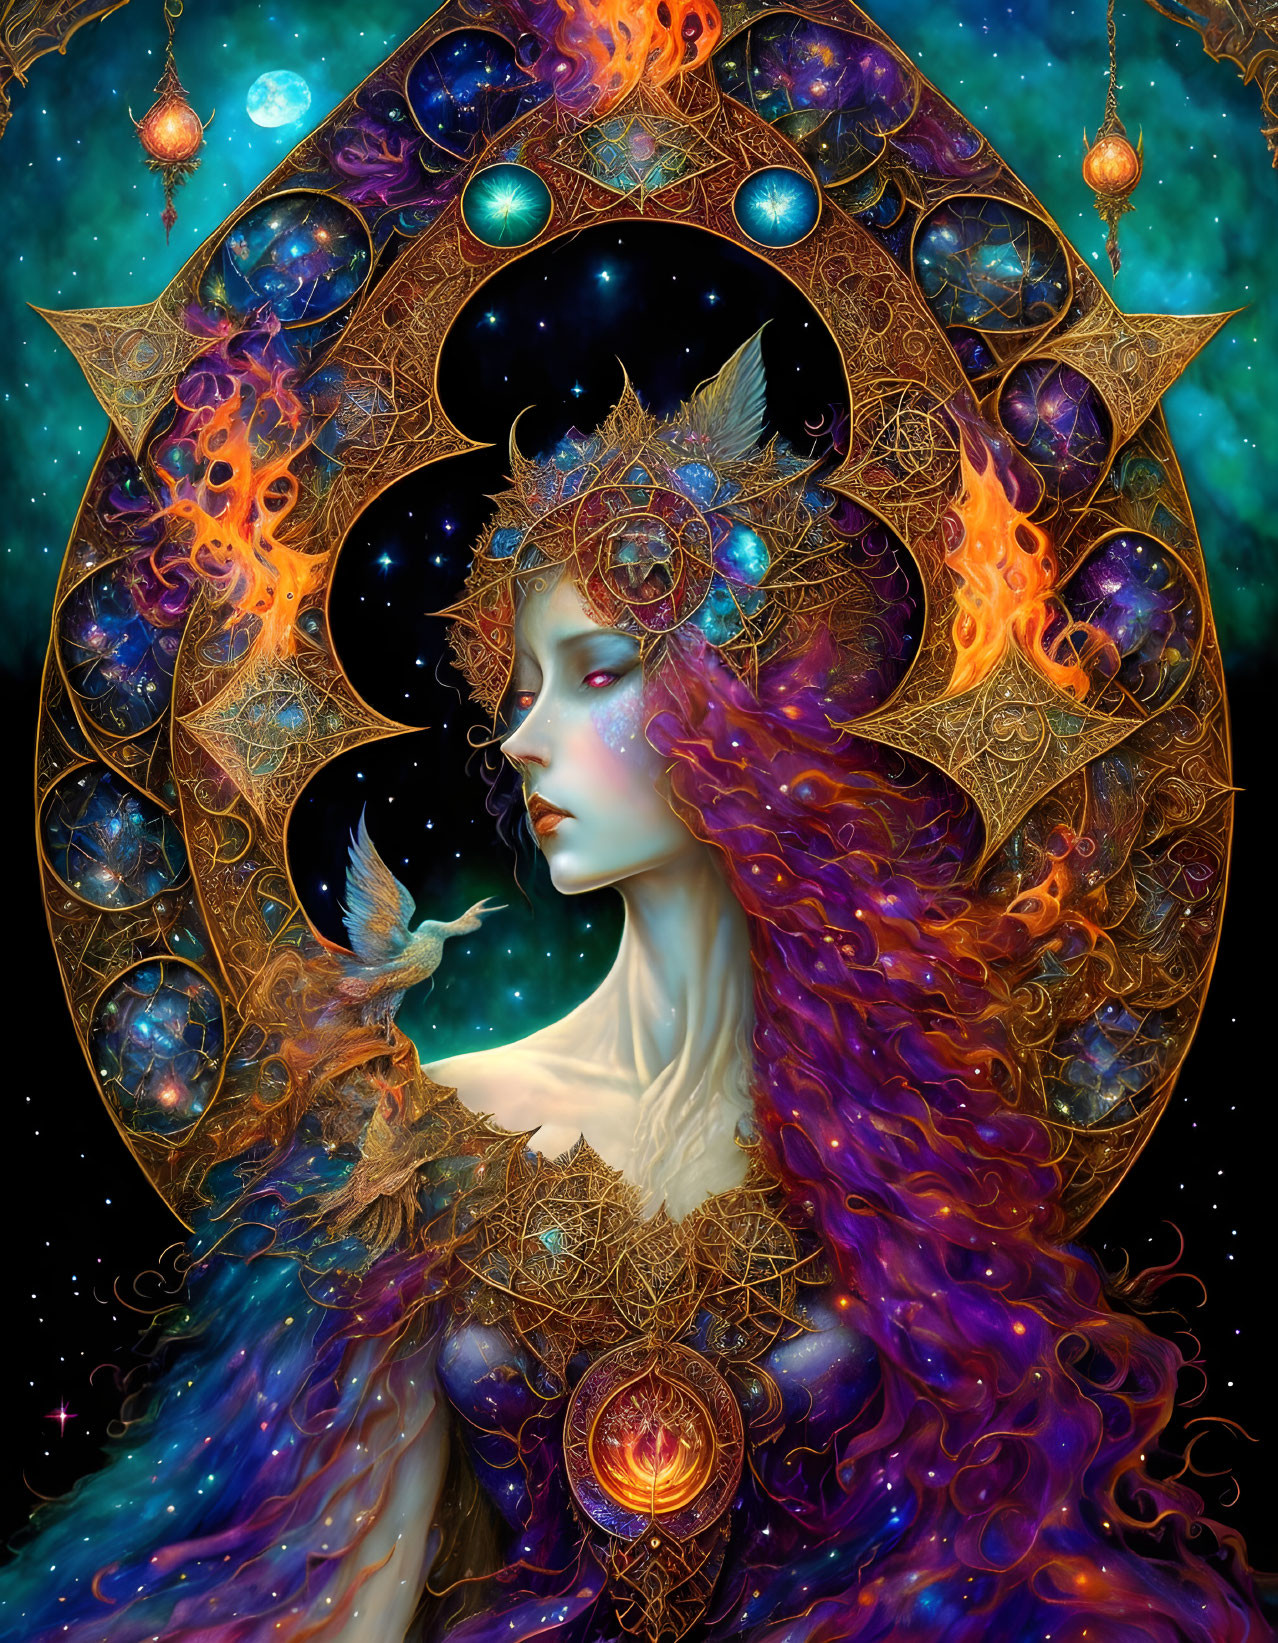 Fantastical portrait of woman with red hair and bird in celestial setting